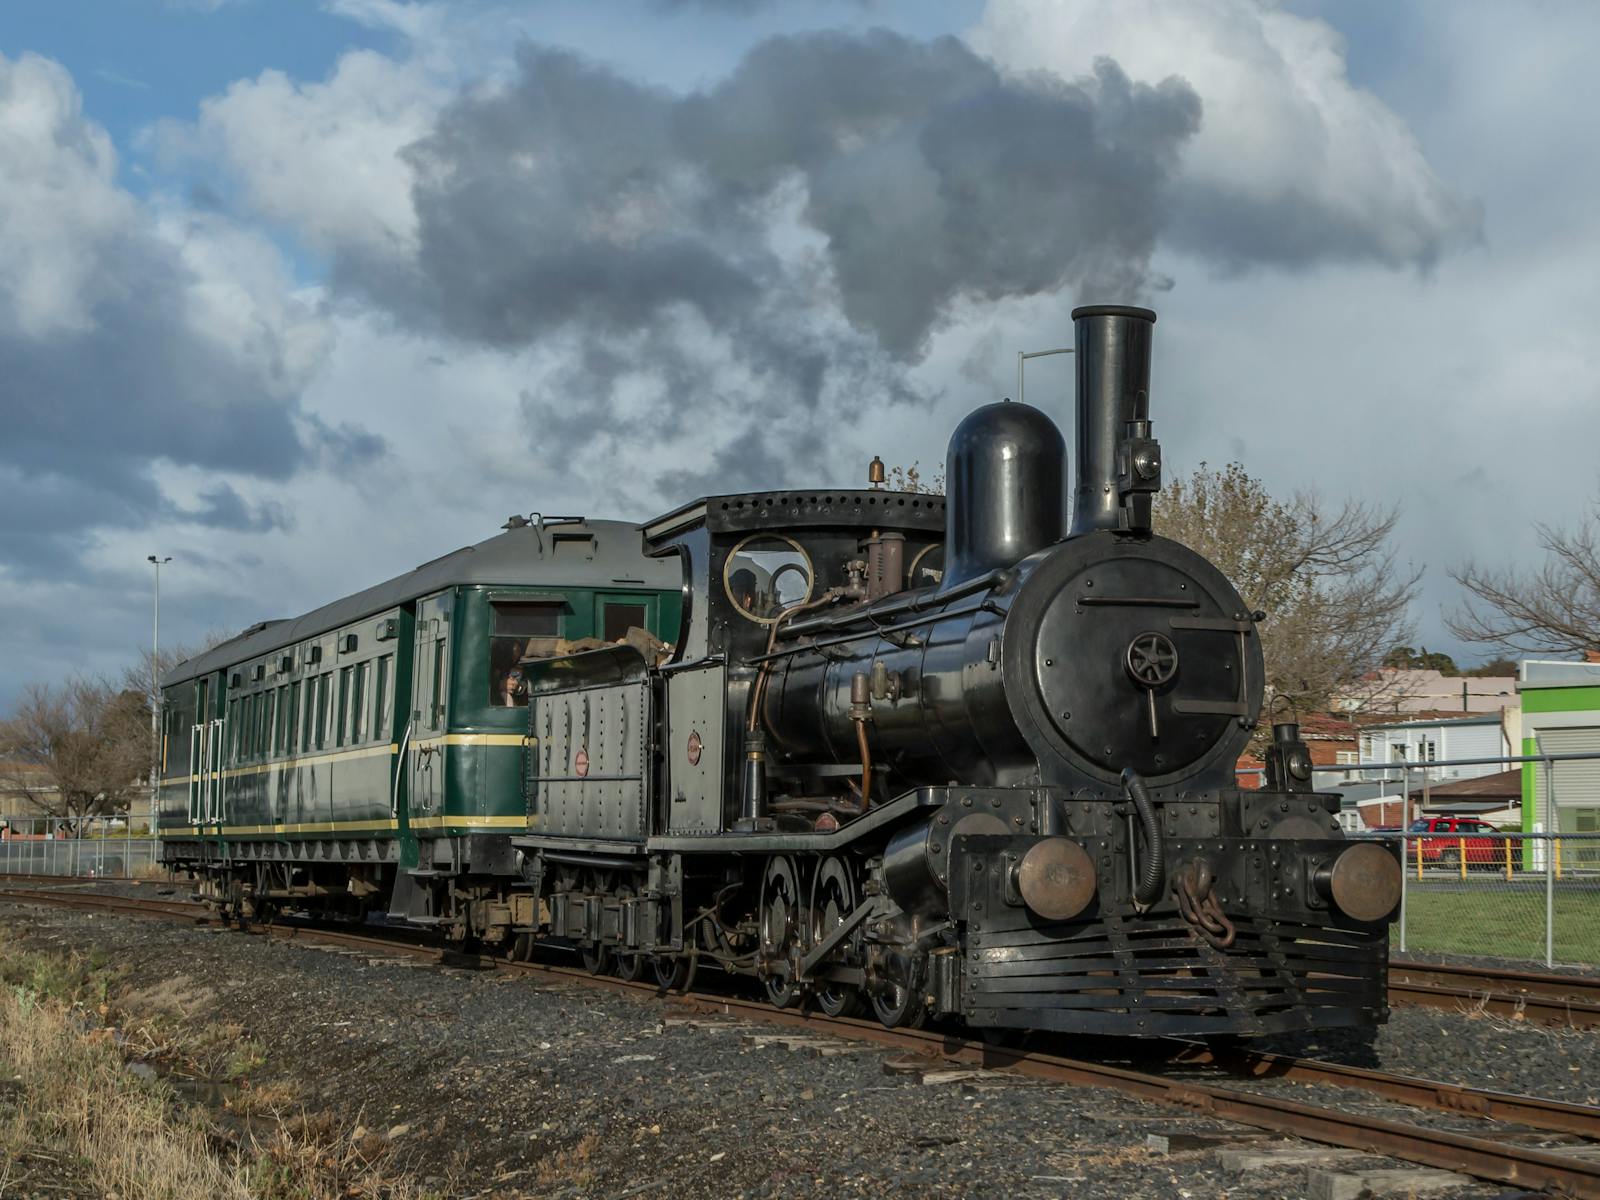 The locomotive and one of the two carriages that will be used this Sunday.